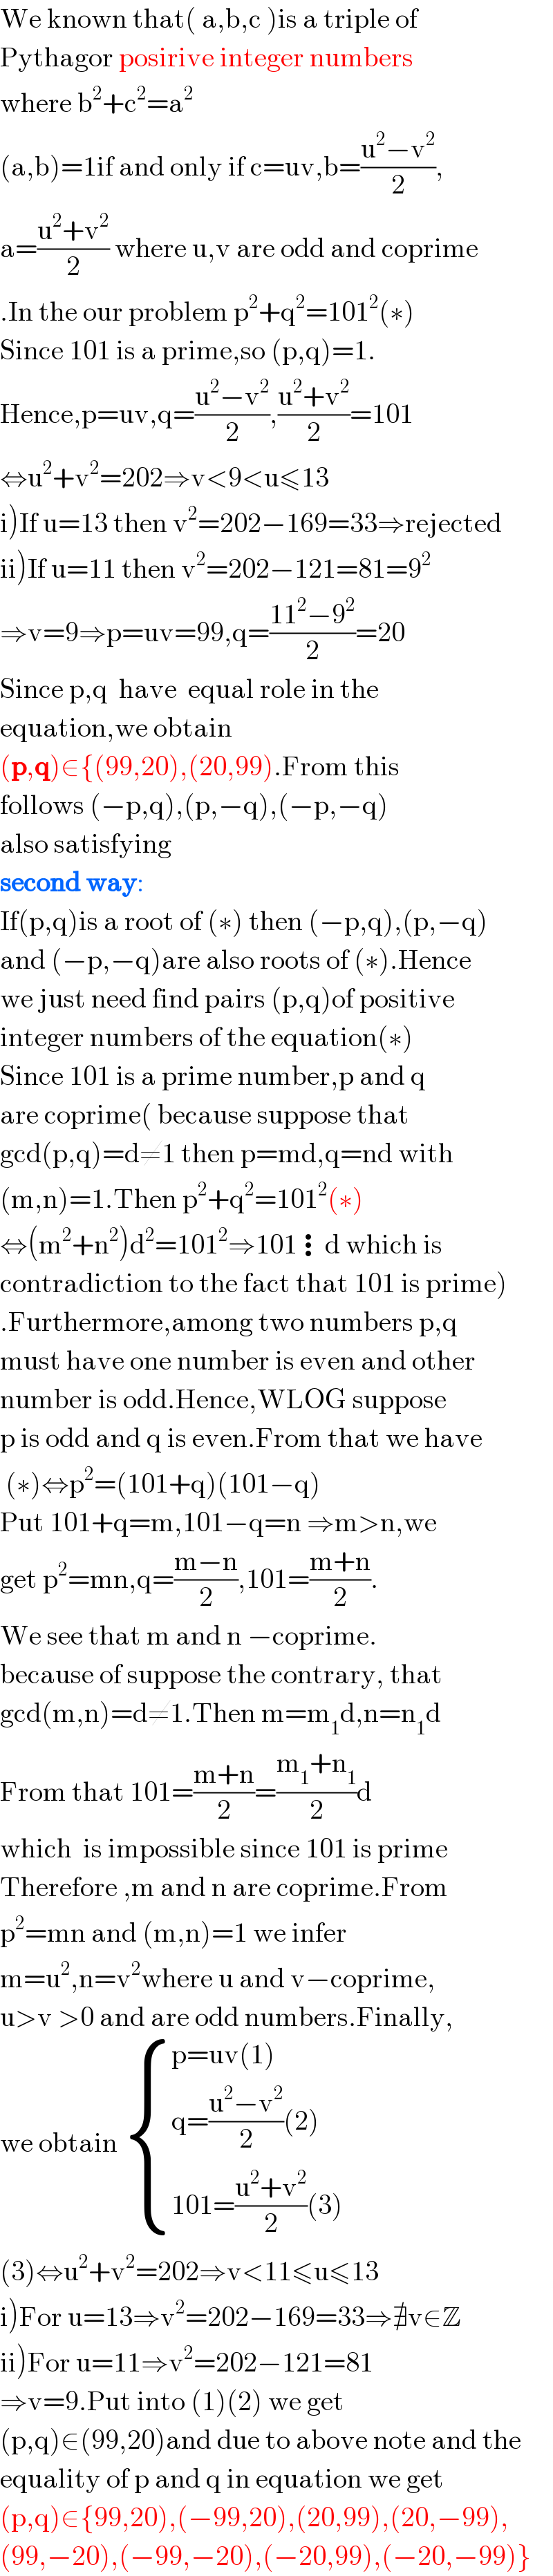 We known that( a,b,c )is a triple of   Pythagor posirive integer numbers   where b^2 +c^2 =a^2   (a,b)=1if and only if c=uv,b=((u^2 −v^2 )/2),  a=((u^2 +v^2 )/2) where u,v are odd and coprime  .In the our problem p^2 +q^2 =101^2 (∗)  Since 101 is a prime,so (p,q)=1.  Hence,p=uv,q=((u^2 −v^2 )/2),((u^2 +v^2 )/2)=101  ⇔u^2 +v^2 =202⇒v<9<u≤13  i)If u=13 then v^2 =202−169=33⇒rejected  ii)If u=11 then v^2 =202−121=81=9^2   ⇒v=9⇒p=uv=99,q=((11^2 −9^2 )/2)=20  Since p,q  have  equal role in the  equation,we obtain   (p,q)∈{(99,20),(20,99).From this  follows (−p,q),(p,−q),(−p,−q)  also satisfying  second way:  If(p,q)is a root of (∗) then (−p,q),(p,−q)  and (−p,−q)are also roots of (∗).Hence  we just need find pairs (p,q)of positive  integer numbers of the equation(∗)  Since 101 is a prime number,p and q  are coprime( because suppose that   gcd(p,q)=d≠1 then p=md,q=nd with  (m,n)=1.Then p^2 +q^2 =101^2 (∗)  ⇔(m^2 +n^2 )d^2 =101^2 ⇒101⋮d which is  contradiction to the fact that 101 is prime)  .Furthermore,among two numbers p,q  must have one number is even and other  number is odd.Hence,WLOG suppose  p is odd and q is even.From that we have   (∗)⇔p^2 =(101+q)(101−q)  Put 101+q=m,101−q=n ⇒m>n,we  get p^2 =mn,q=((m−n)/2),101=((m+n)/2).  We see that m and n −coprime.  because of suppose the contrary, that  gcd(m,n)=d≠1.Then m=m_1 d,n=n_1 d  From that 101=((m+n)/2)=((m_1 +n_1 )/2)d  which  is impossible since 101 is prime  Therefore ,m and n are coprime.From  p^2 =mn and (m,n)=1 we infer   m=u^2 ,n=v^2 where u and v−coprime,  u>v >0 and are odd numbers.Finally,  we obtain  { ((p=uv(1))),((q=((u^2 −v^2 )/2)(2))),((101=((u^2 +v^2 )/2)(3))) :}  (3)⇔u^2 +v^2 =202⇒v<11≤u≤13  i)For u=13⇒v^2 =202−169=33⇒∄v∈Z  ii)For u=11⇒v^2 =202−121=81  ⇒v=9.Put into (1)(2) we get  (p,q)∈(99,20)and due to above note and the  equality of p and q in equation we get  (p,q)∈{99,20),(−99,20),(20,99),(20,−99),  (99,−20),(−99,−20),(−20,99),(−20,−99)}  